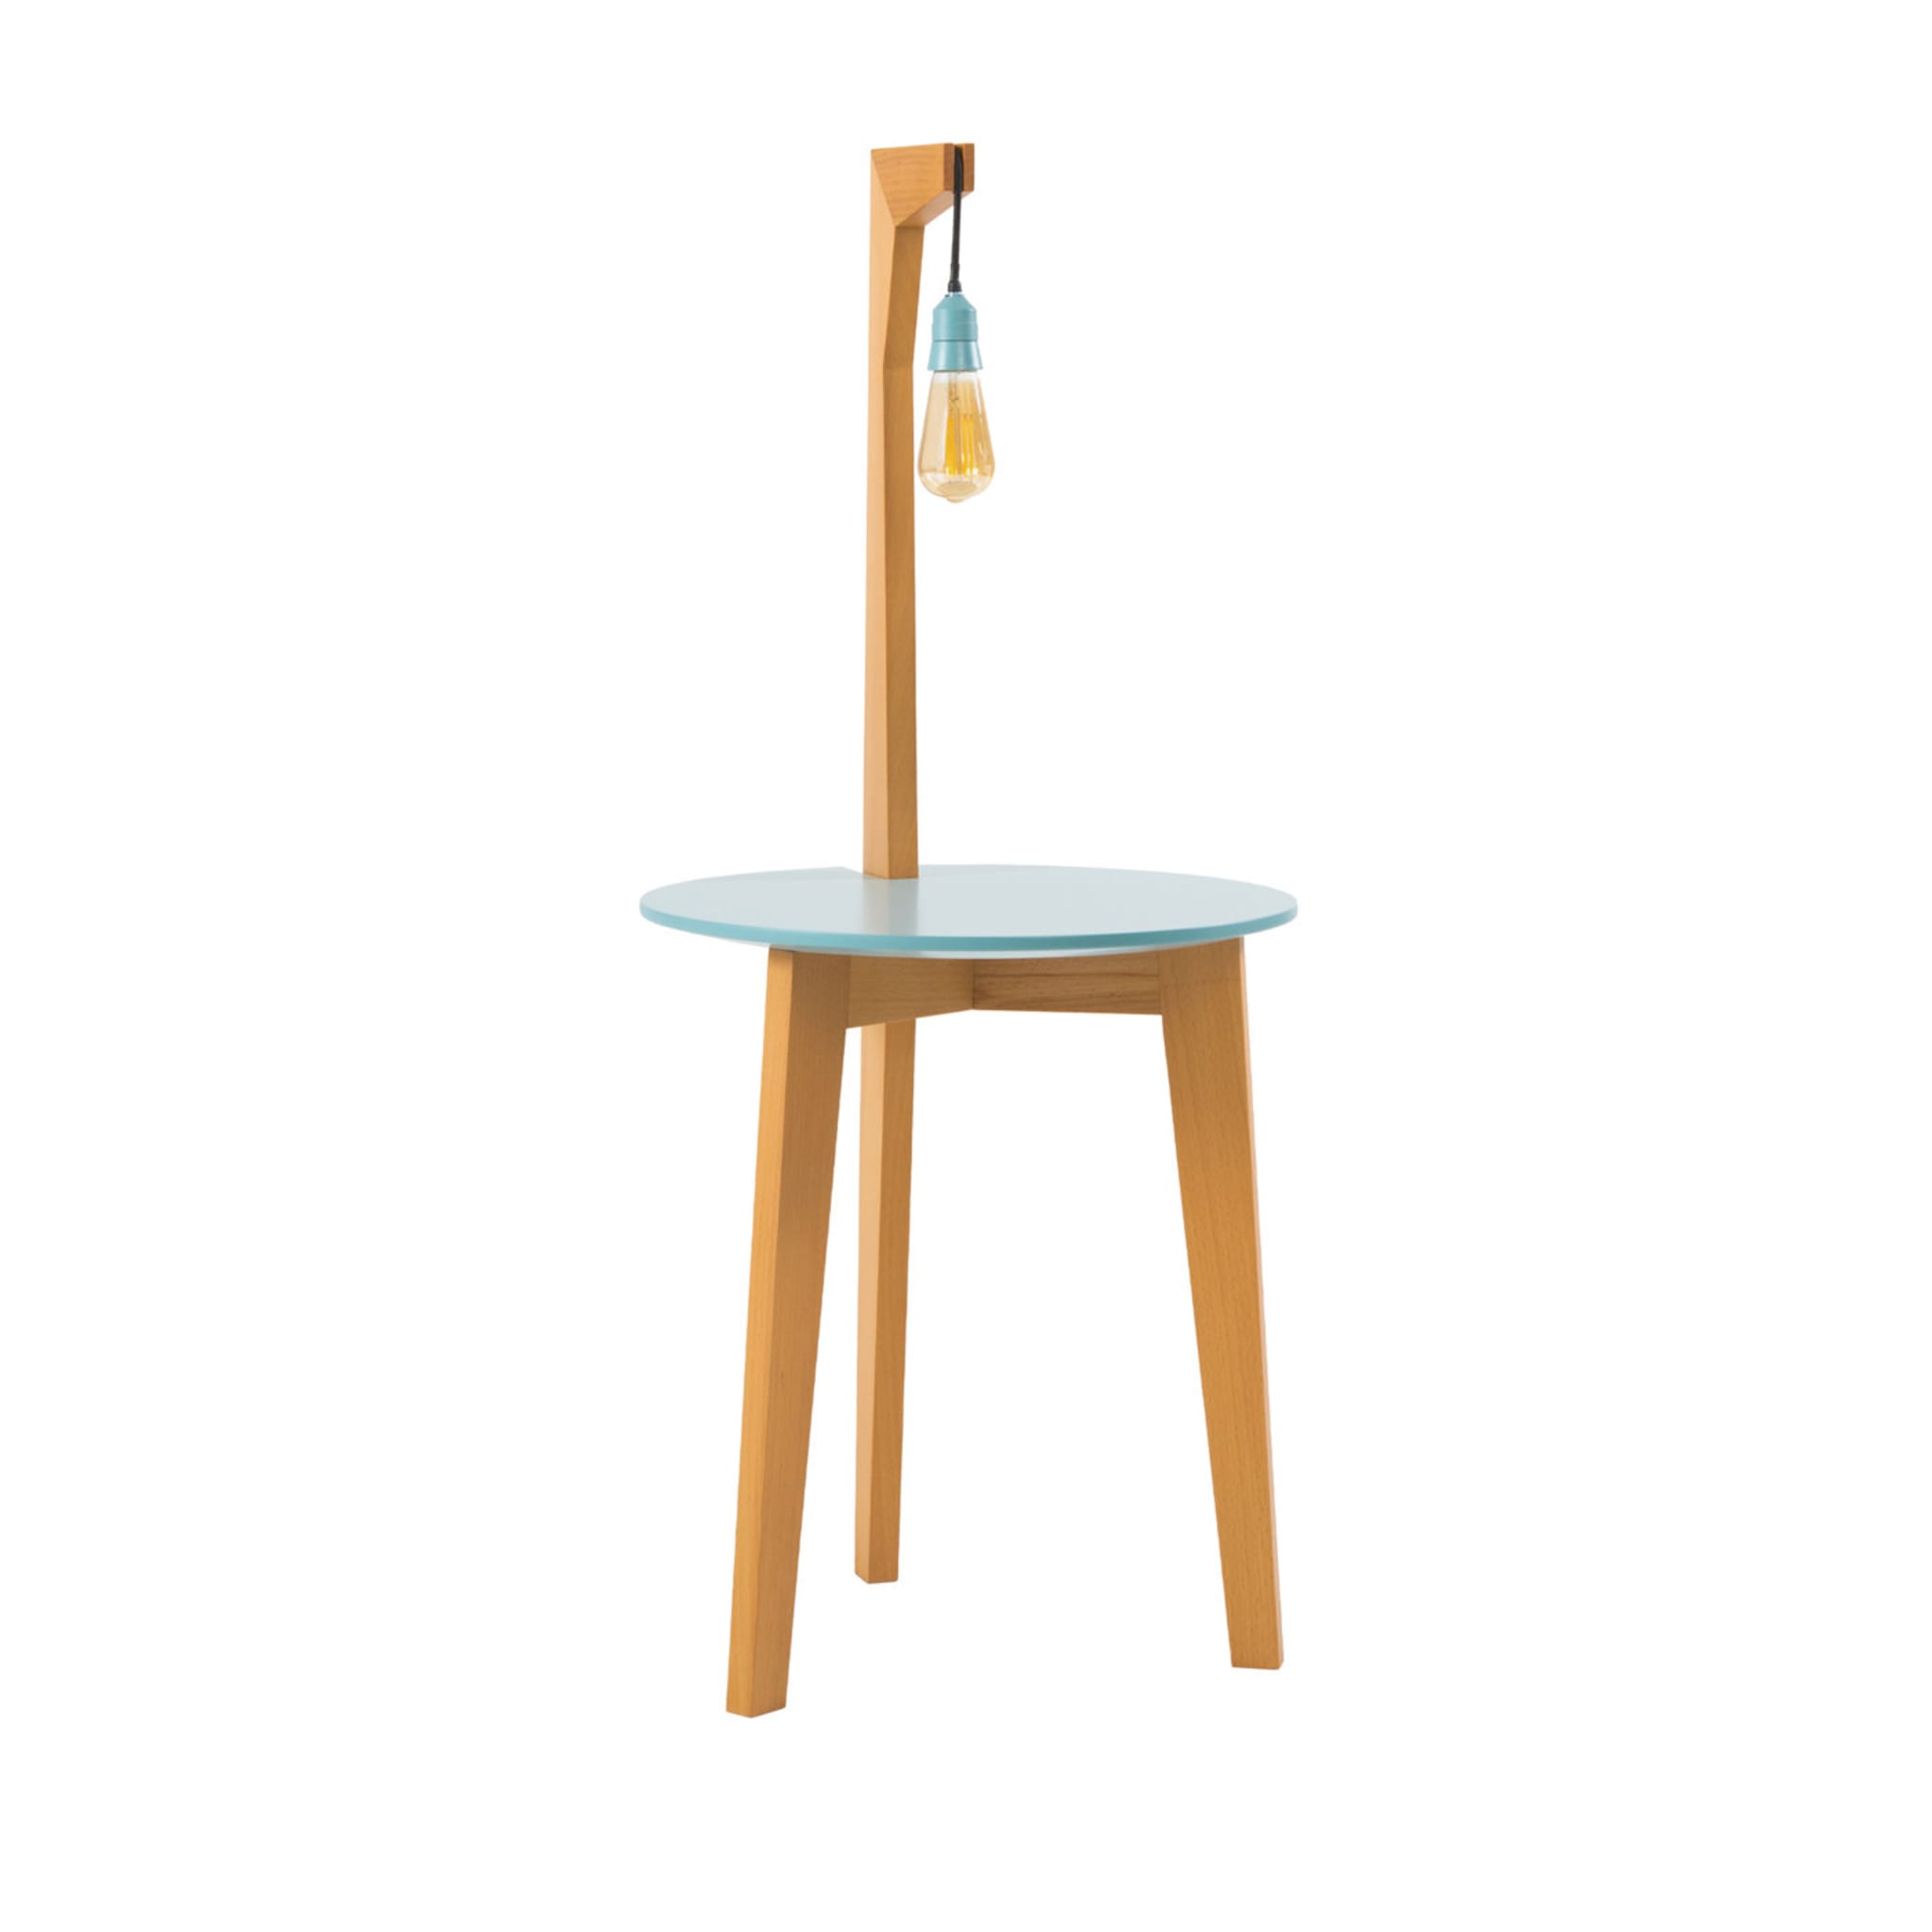 Crane Side Table with Lamp - Main view